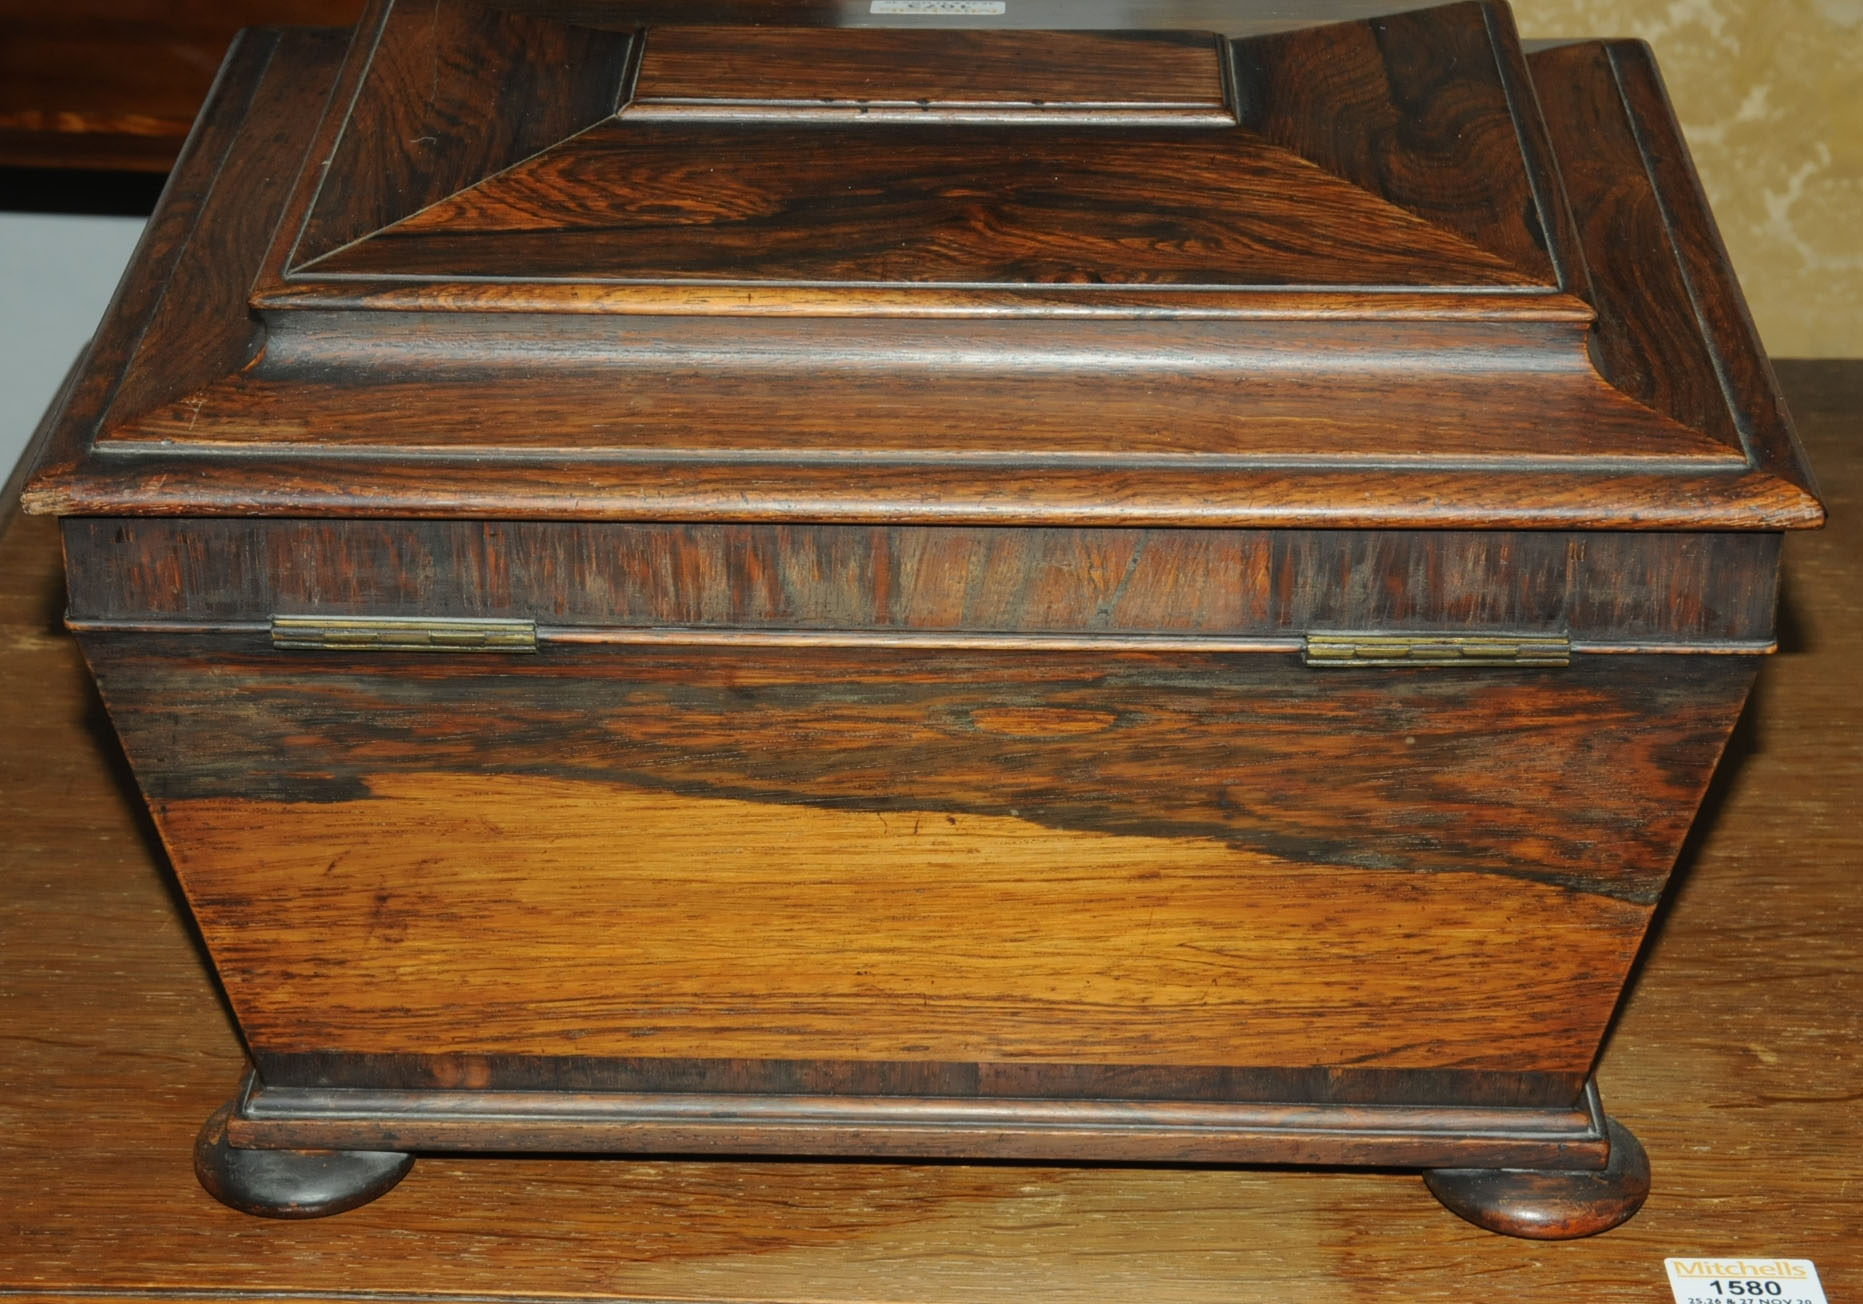 A Regency rosewood table box, with bronze handles, sarcophagus form with interior fitted for sewing. - Image 5 of 10